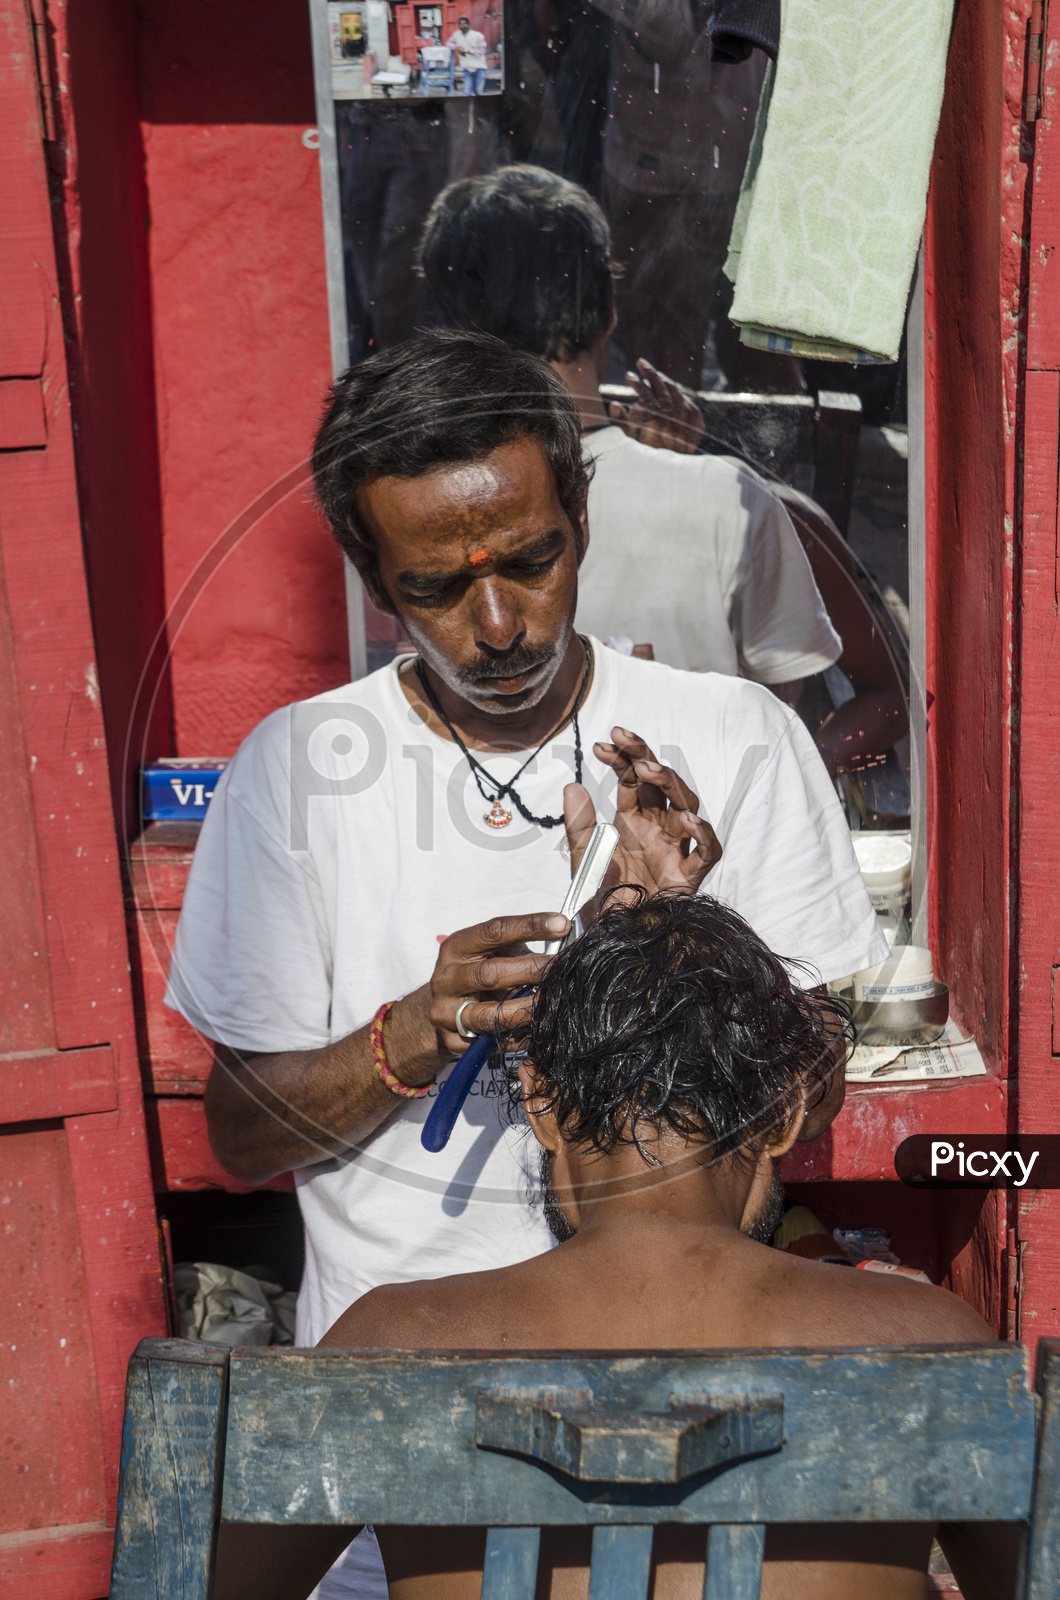 Barber shaving the hair of a man